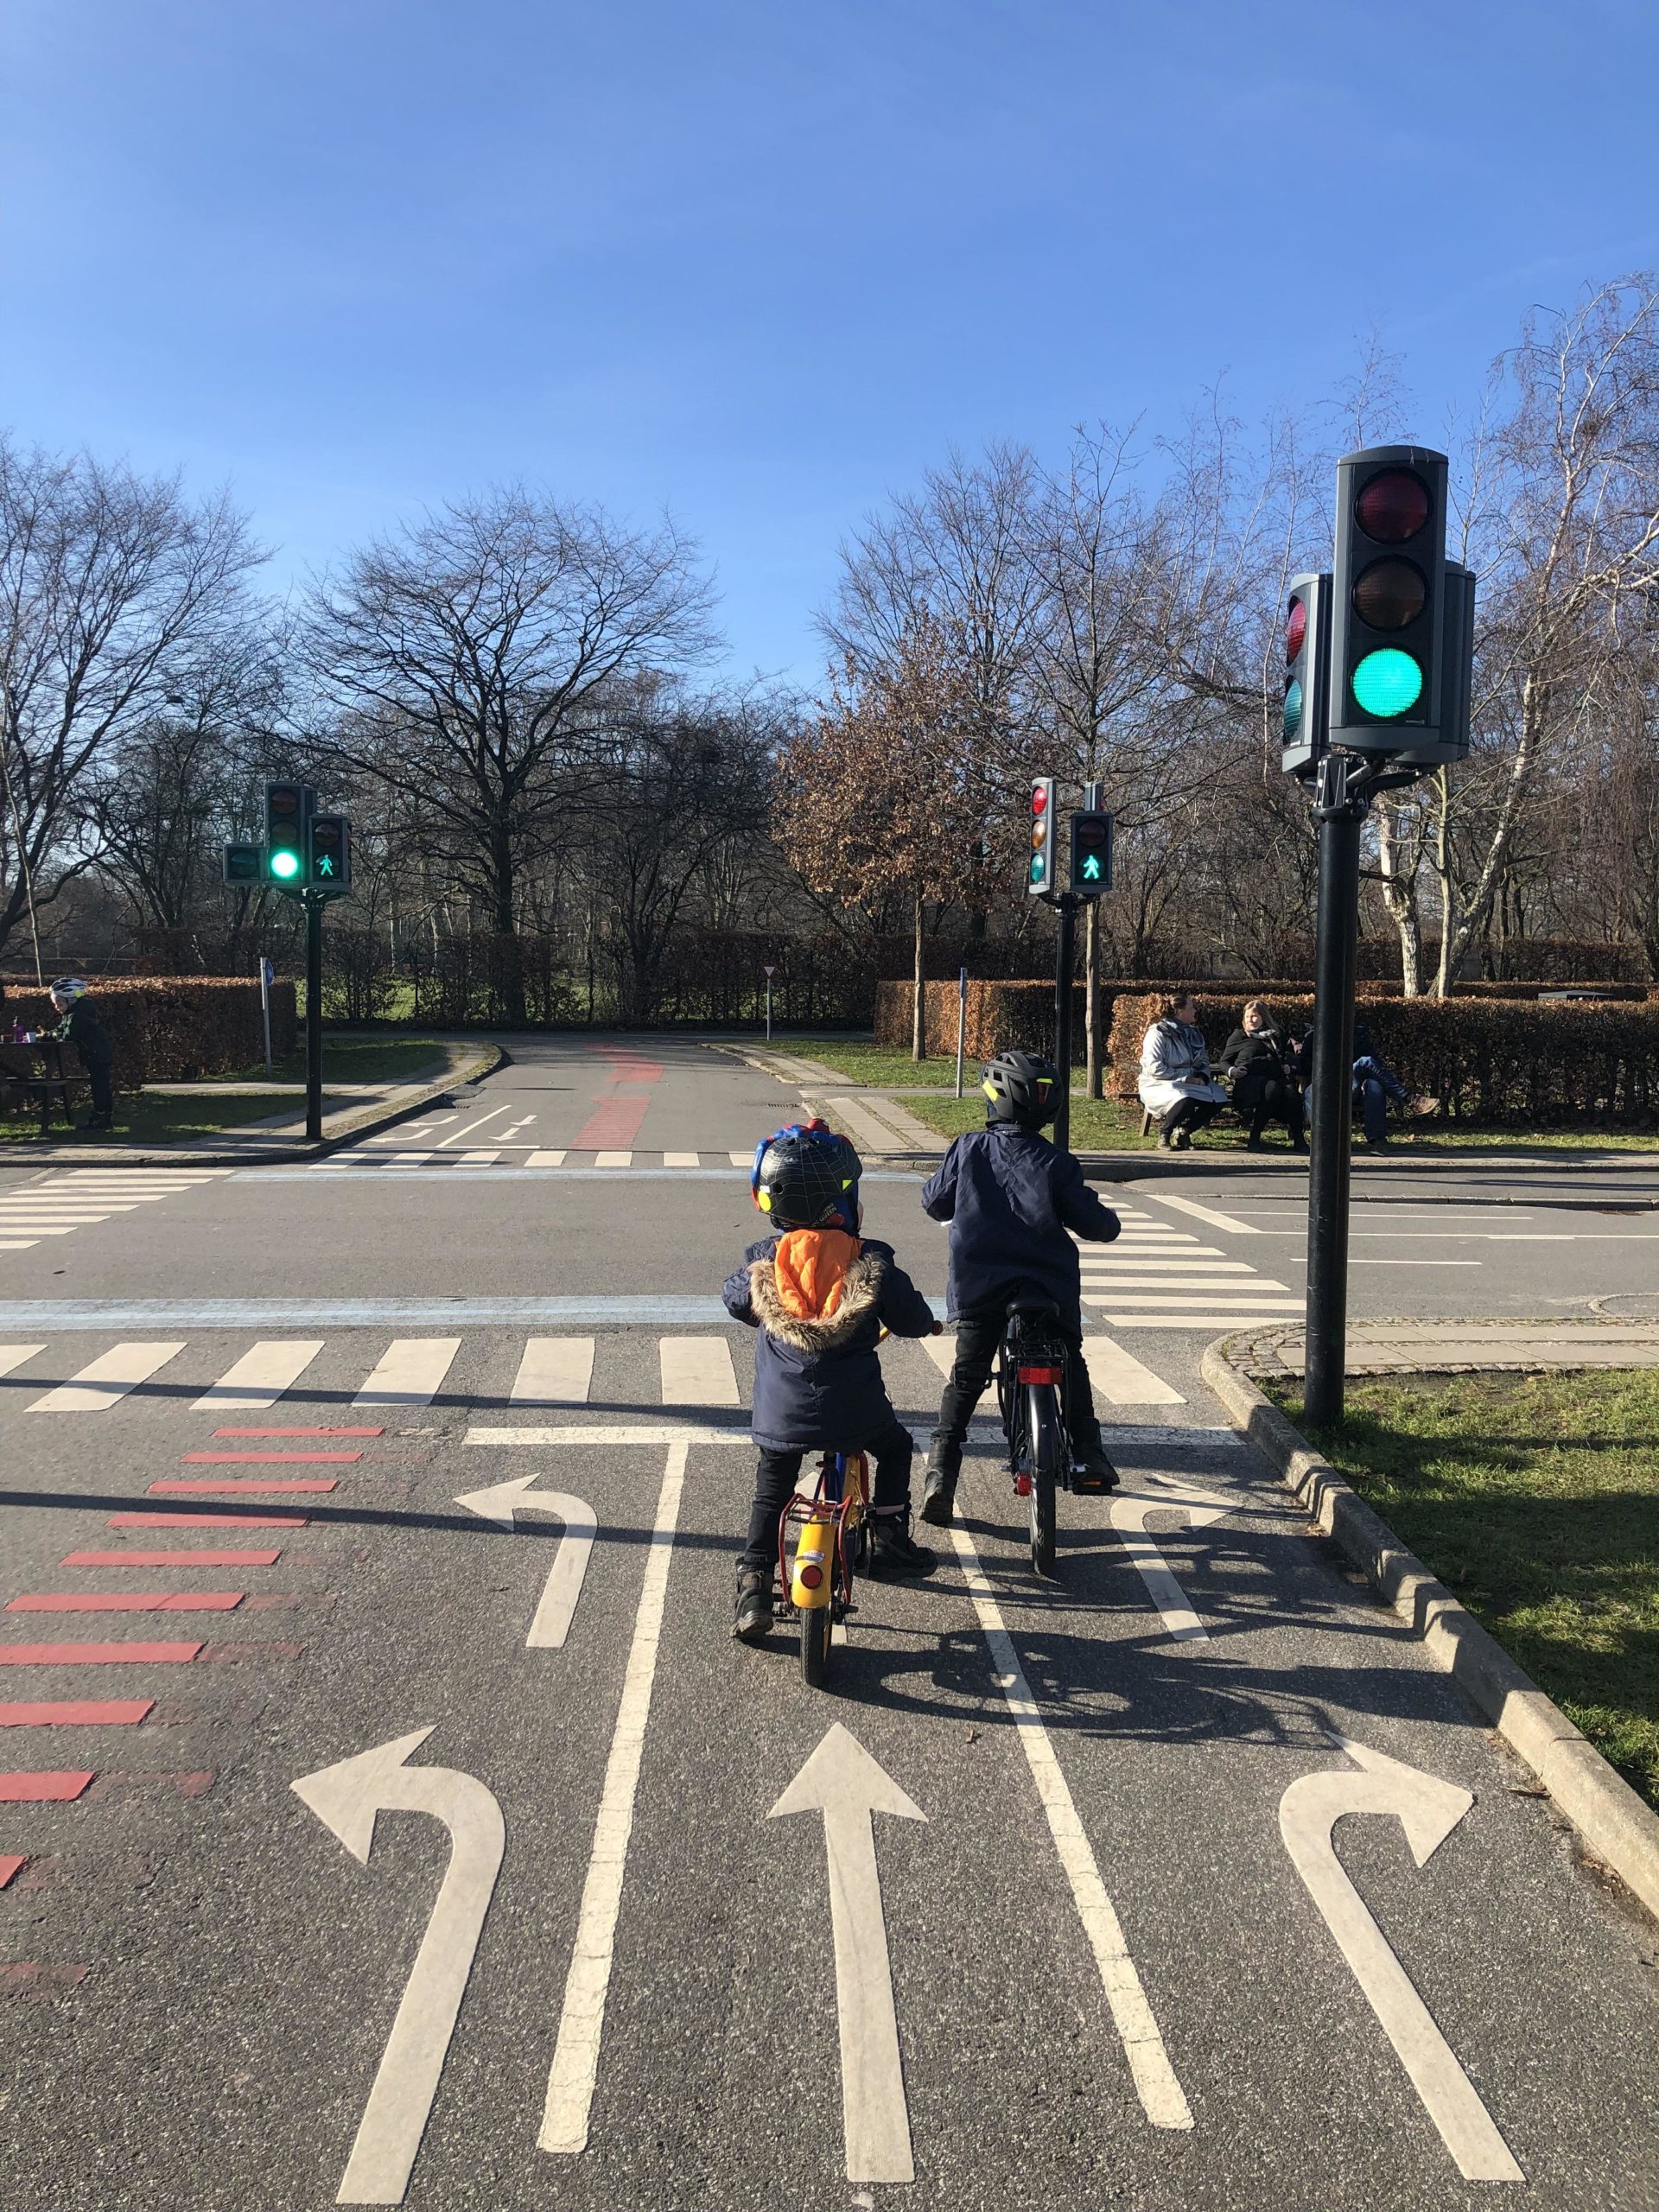 Learning+to+bicycle+on+the+traffic+playground+where+children+can+learn+the+traffic+rules+in+a+safe+environment